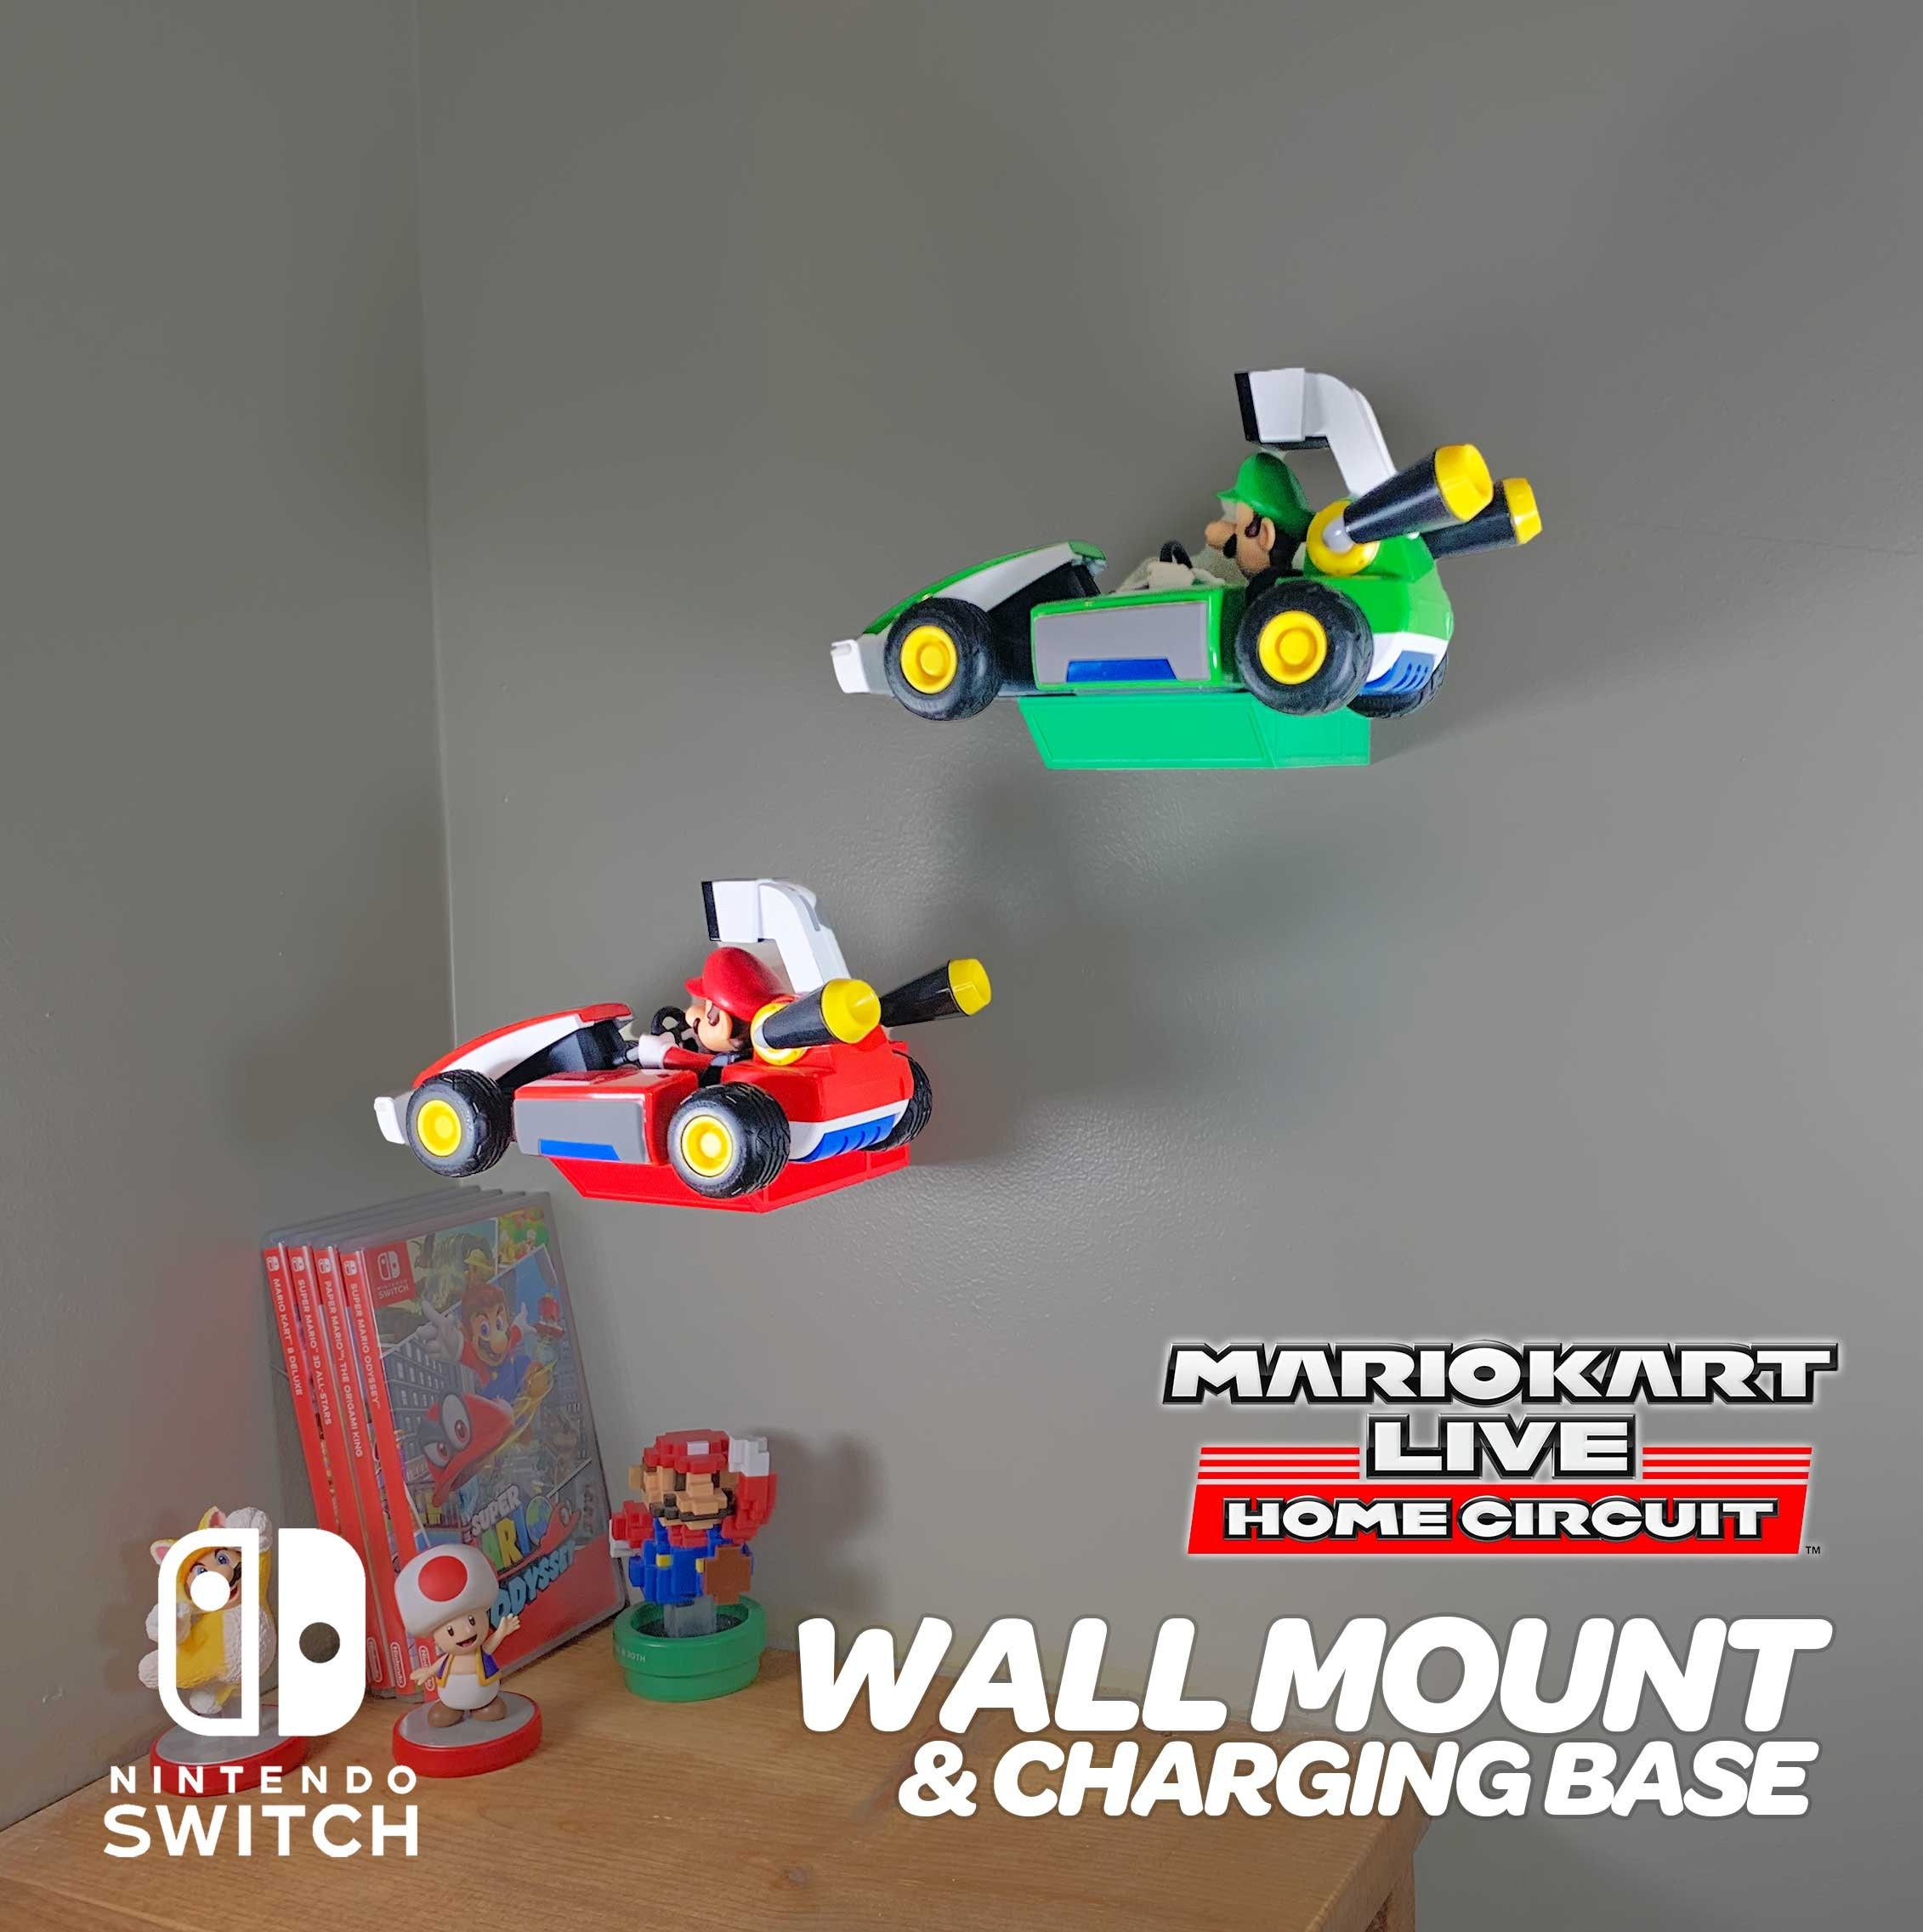 Mario Kart Live: Home Circuit review - A hell of a lot of magic for $100